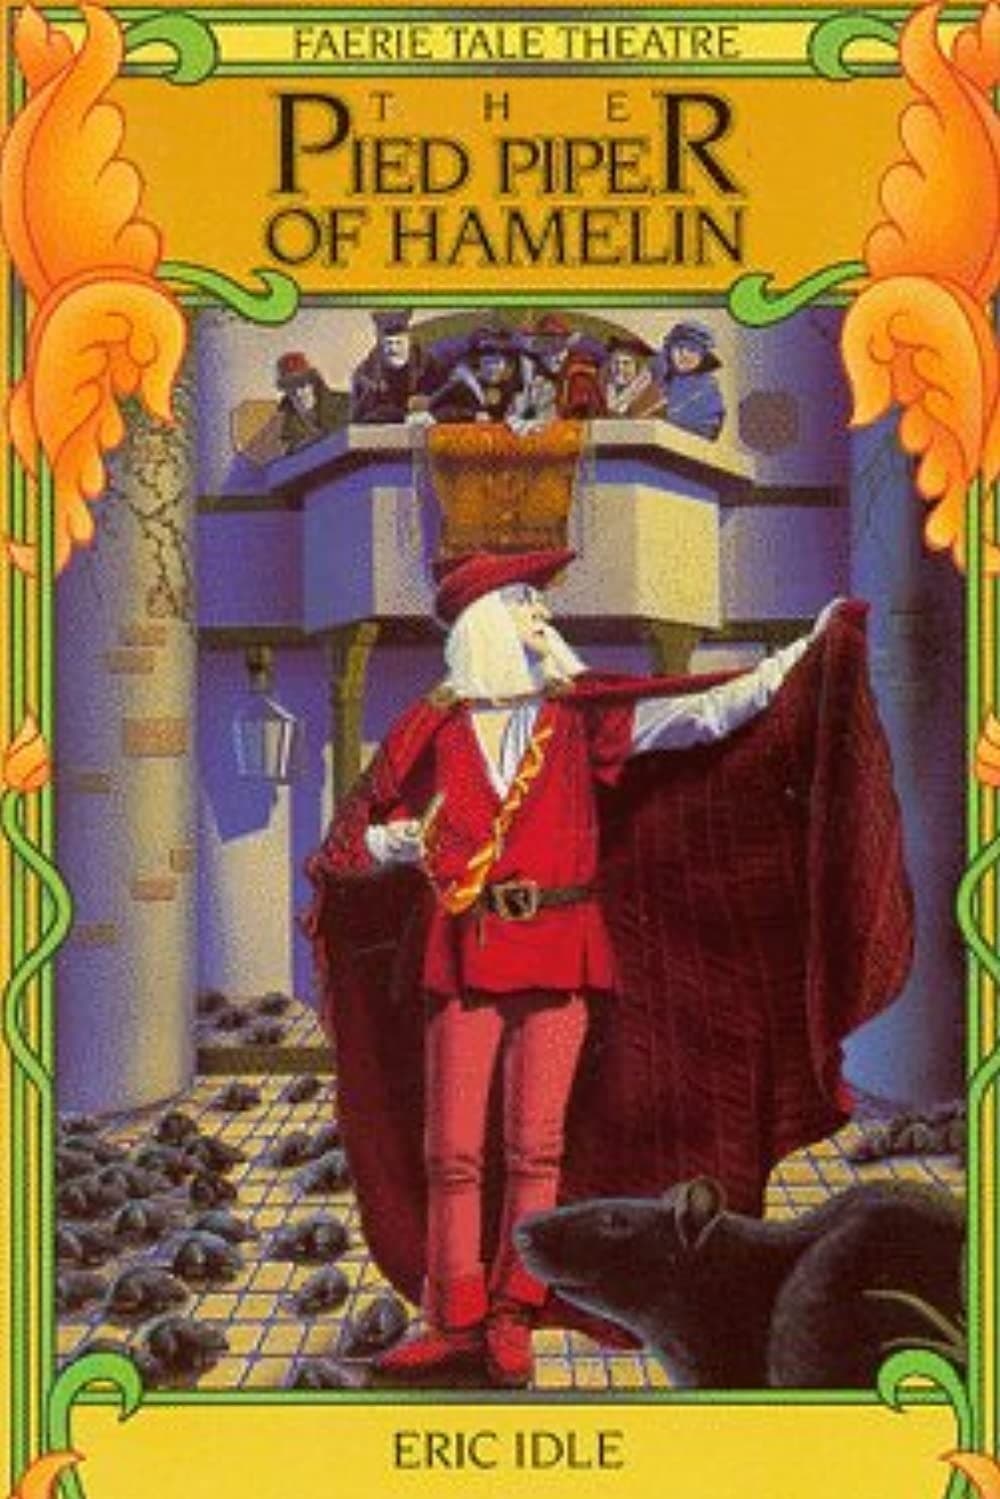 The Pied Piper of Hamelin (1985)